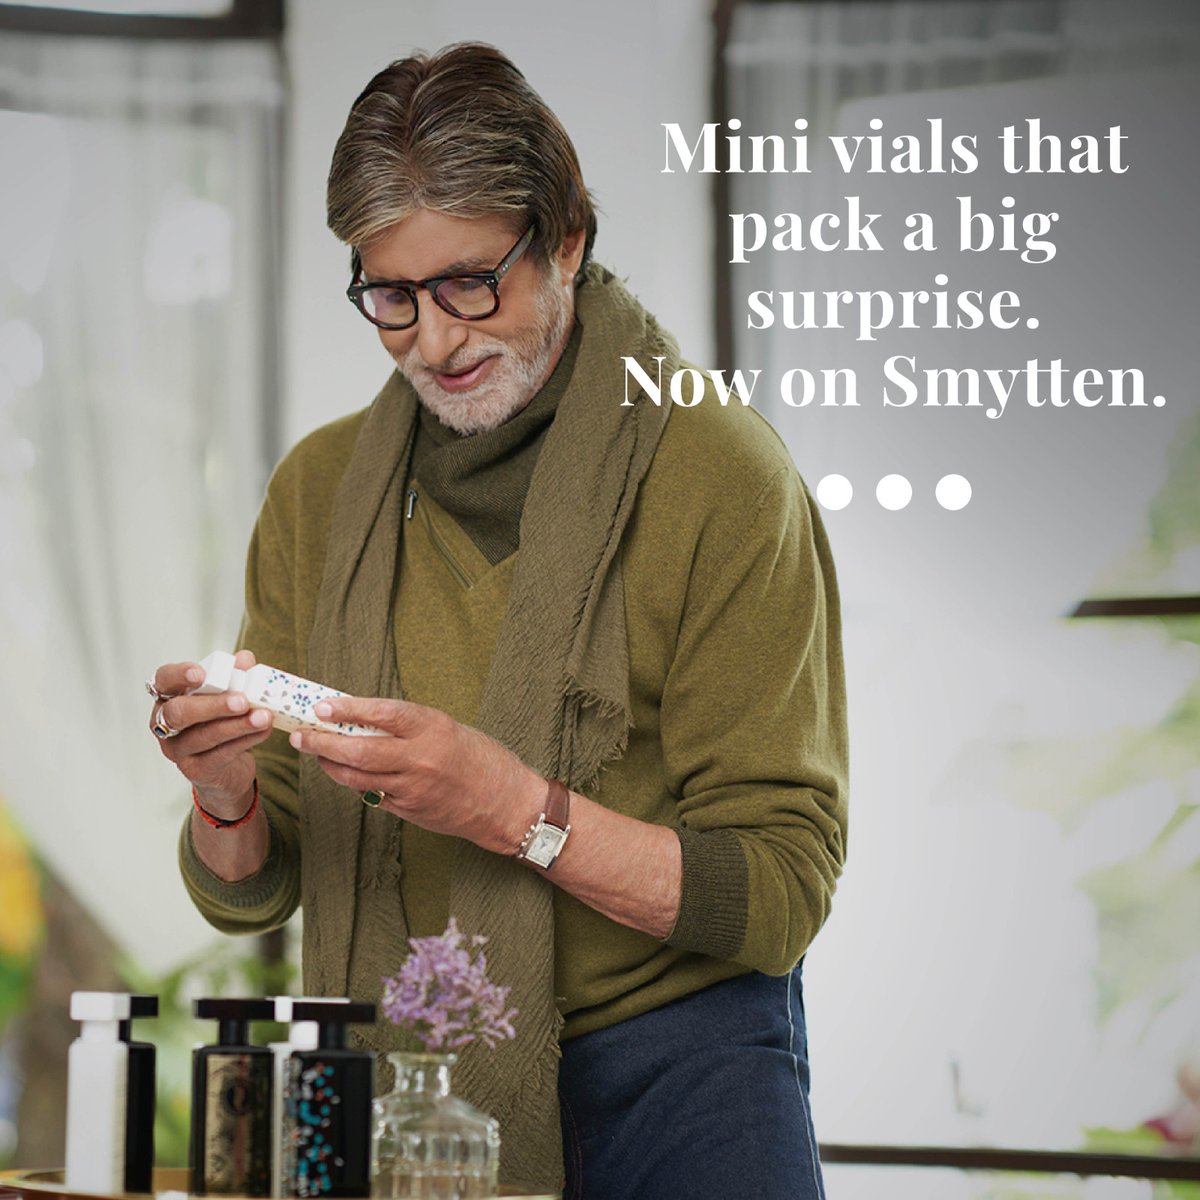 T 4659 - Try Legend 1942 Mini Perfumes exclusively on Smytten, India’s largest trial platform. #tryLegend1942Perfumes

Paid partnership with : @legend_1942 

#BestFragrances #LongLasting #SmellGood #GenderEqual #Legend1942Perfumes